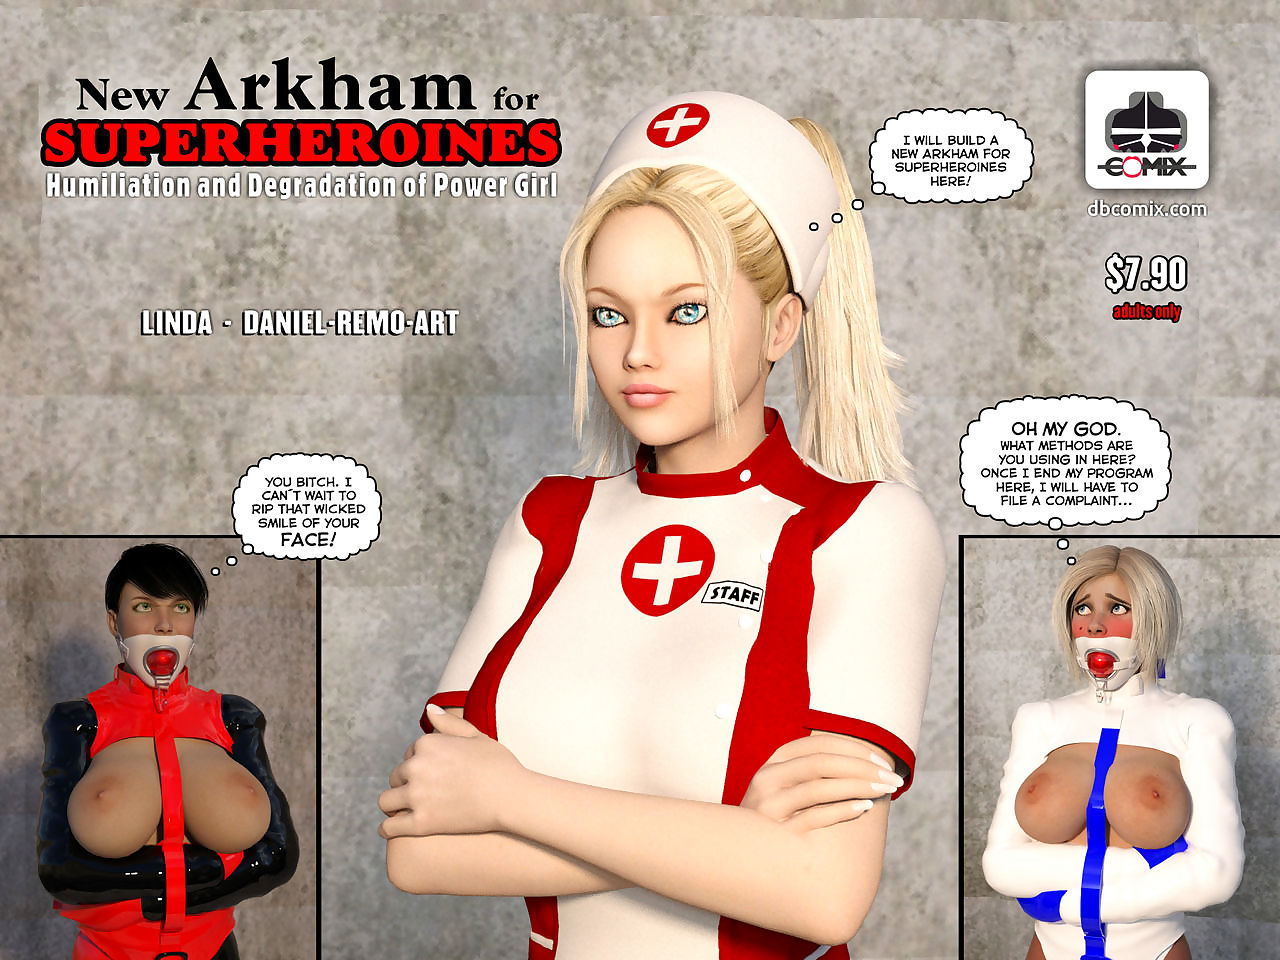 Far-out Arkham Be incumbent on Superheroines 1 - Ignominy coupled with Ignominy be worthwhile for Capacity Unsubtle